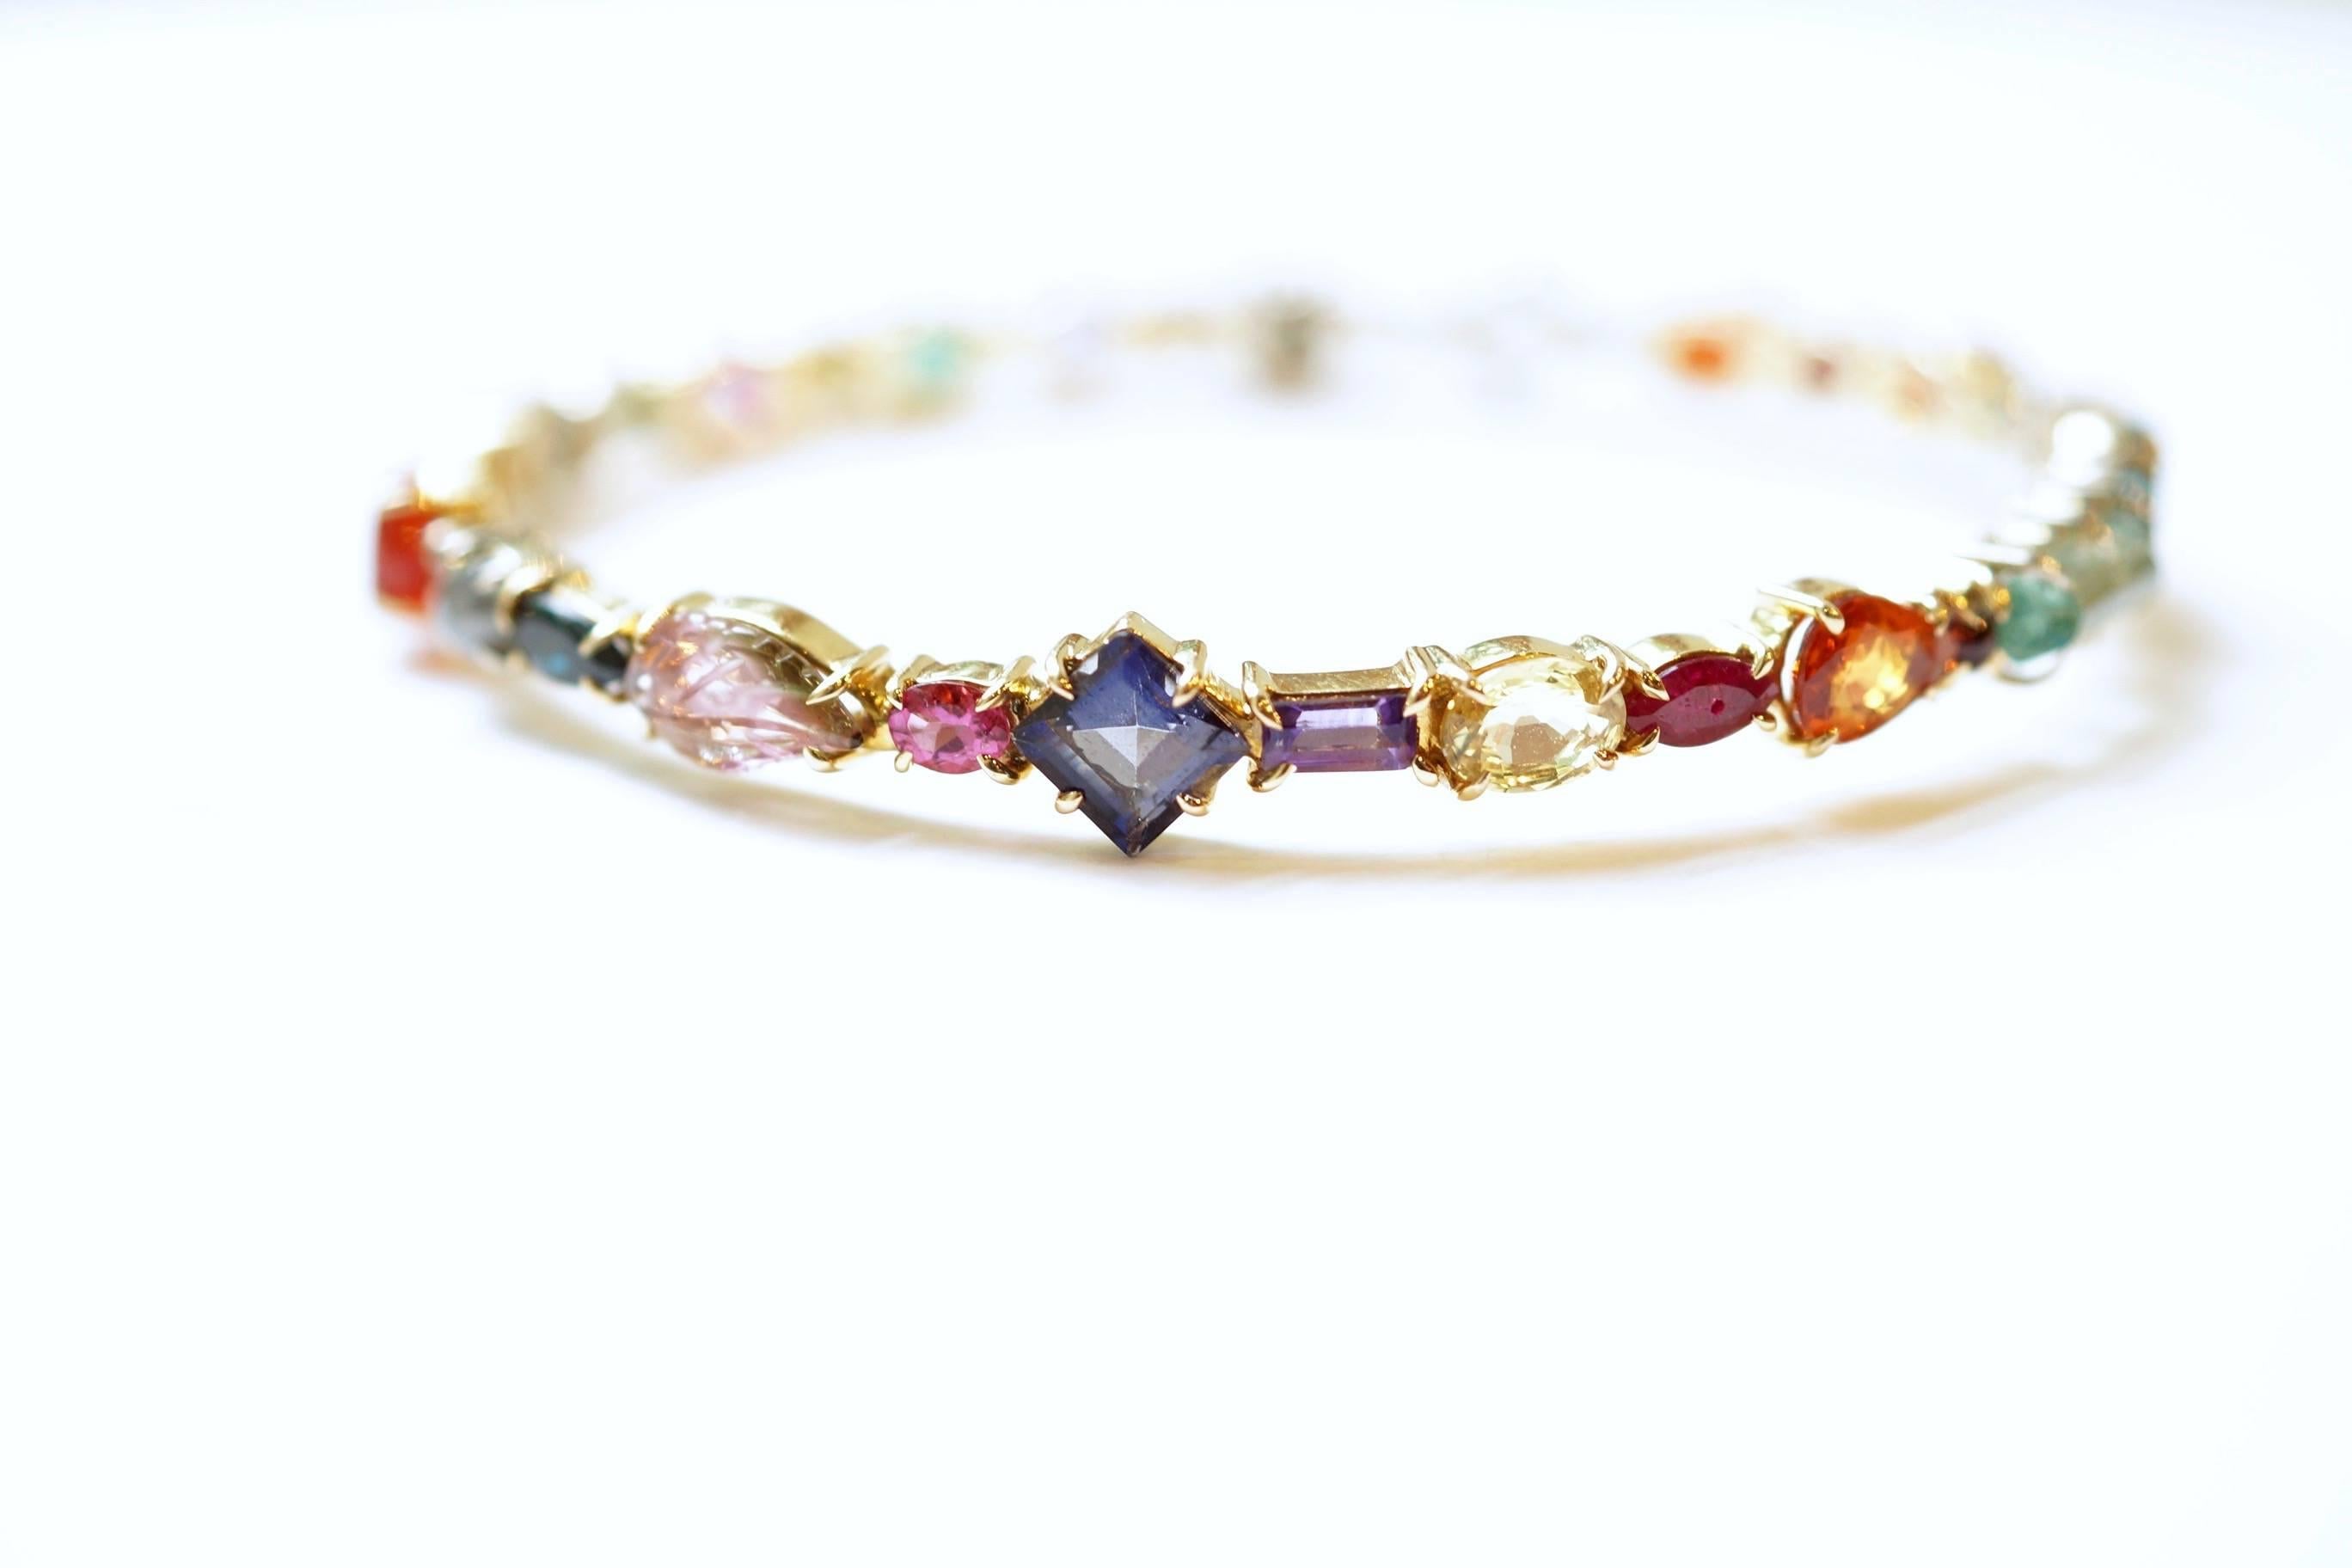 Baby Bangle
An eighteen-karat yellow, rose, and white gold bangle composed of different shades, colours and cuts of natural gemstones and diamonds. 
2 ½ diameter
Diamond Total Weight – 2.91 cts.
Gemstone Total Weight – 15.21 cts.
Coloured